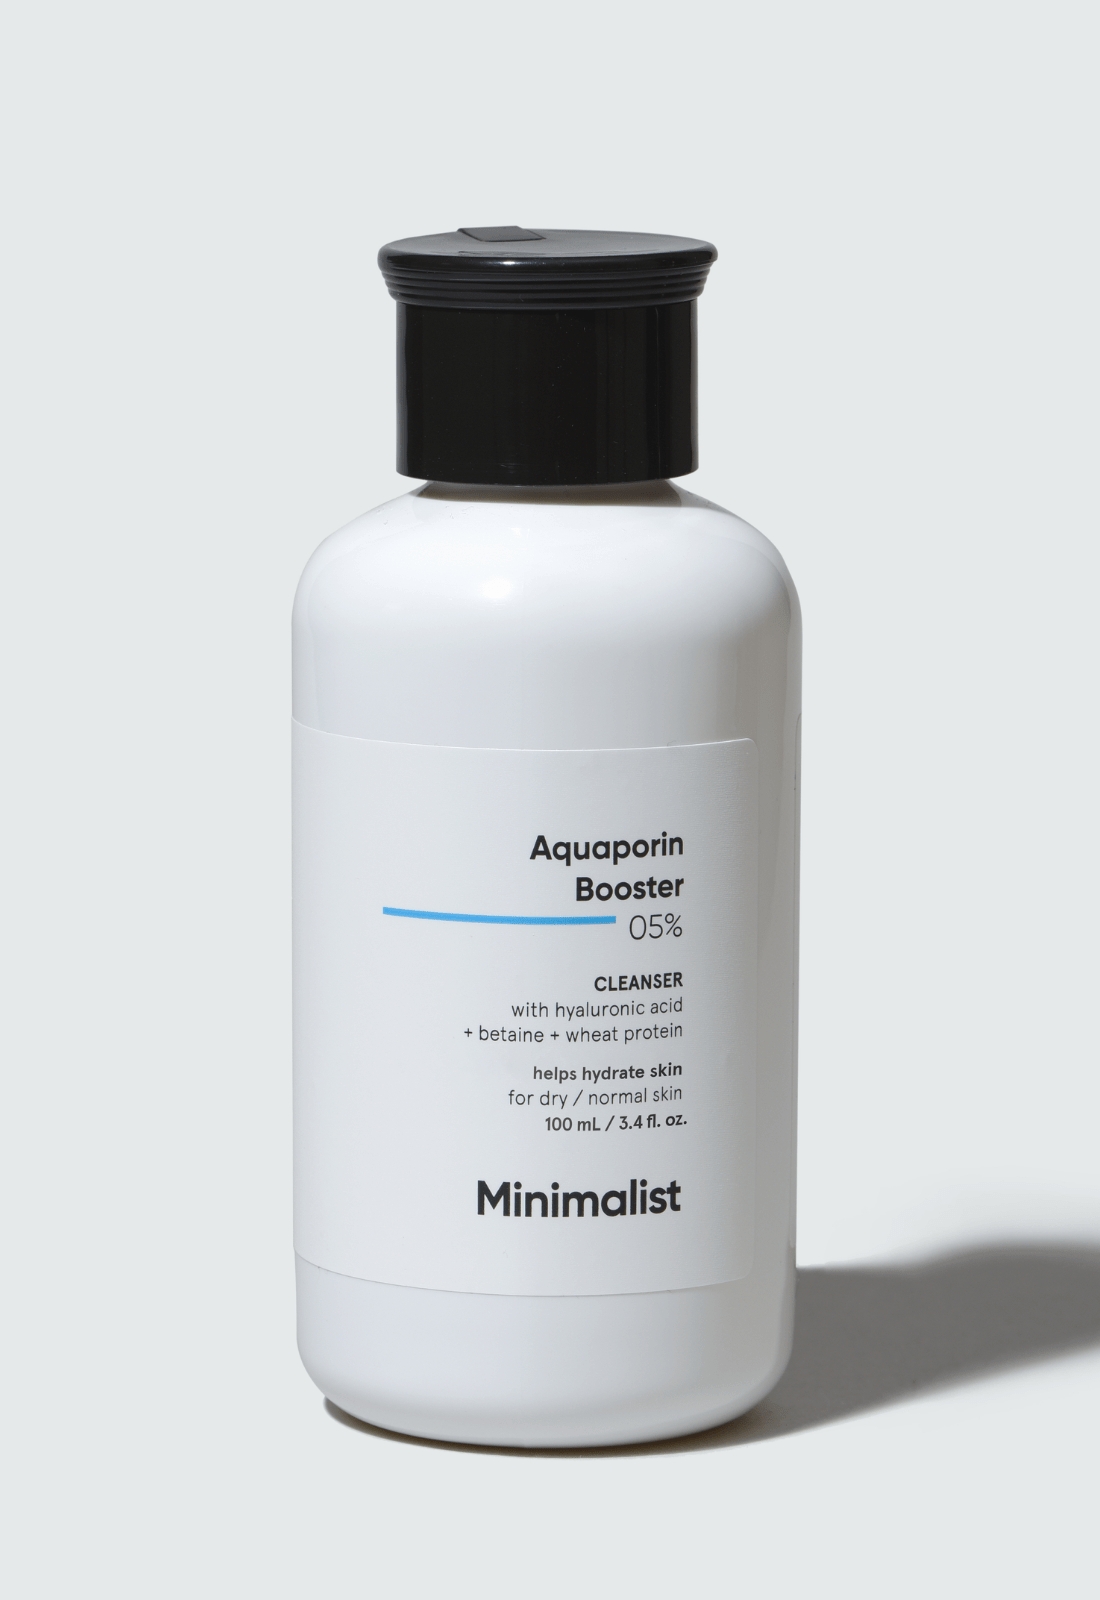 Aquaporin Booster 05% Cleanser